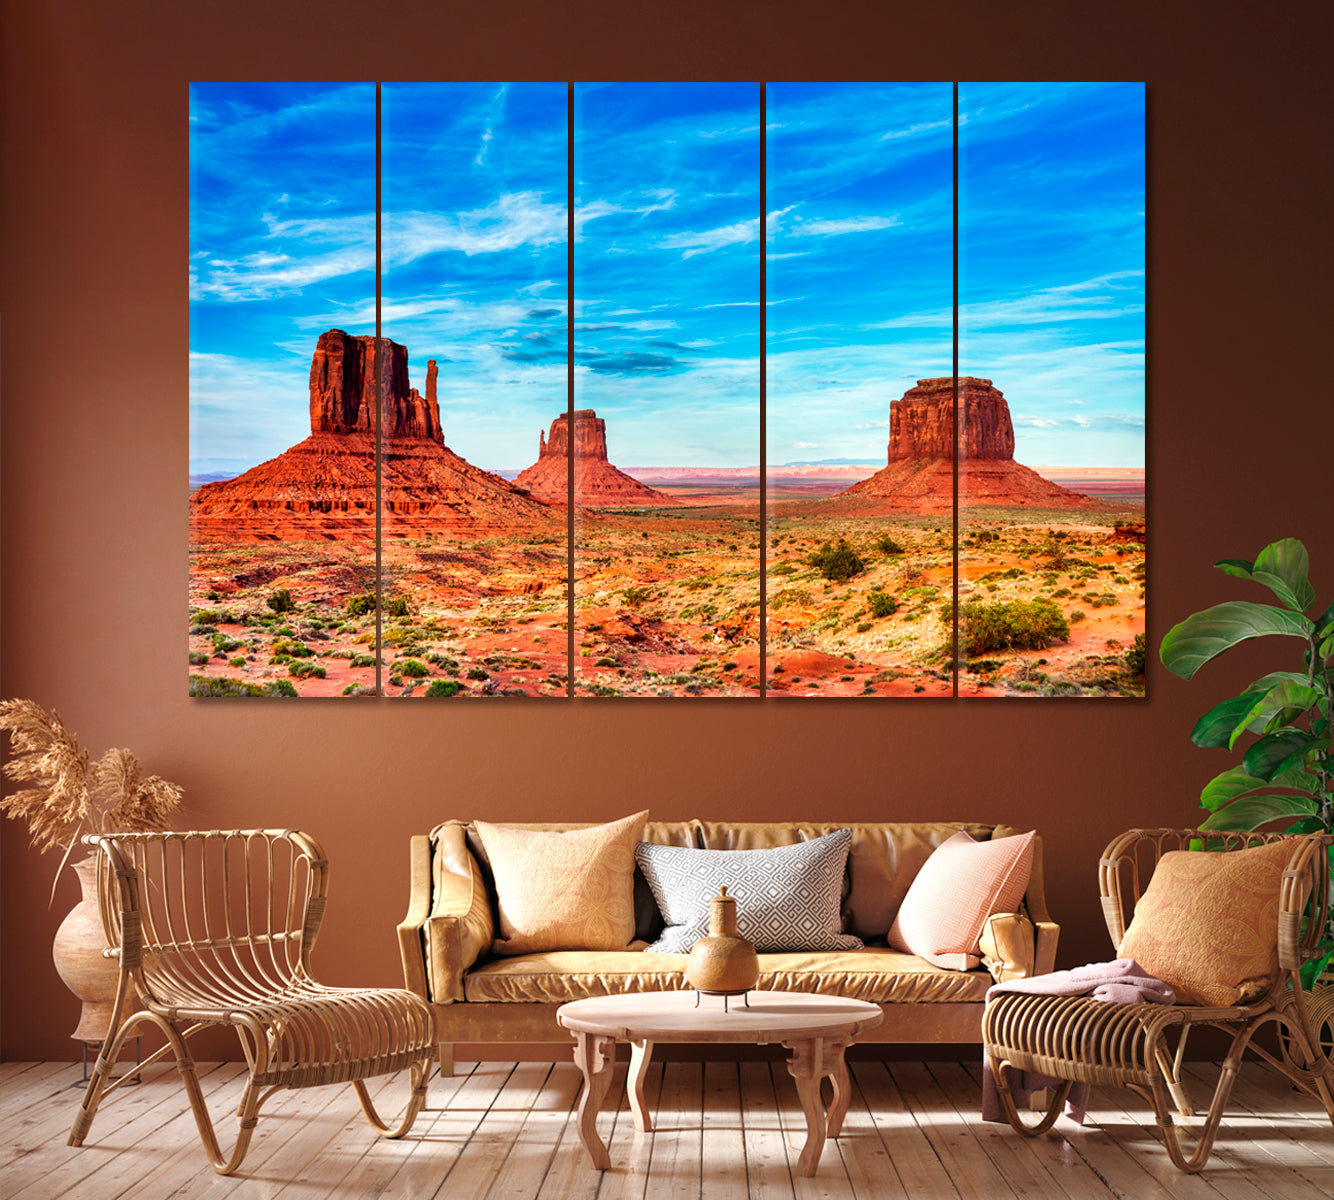 Oljato-Monument Valley Utah United States Canvas Print ArtLexy 5 Panels 36"x24" inches 